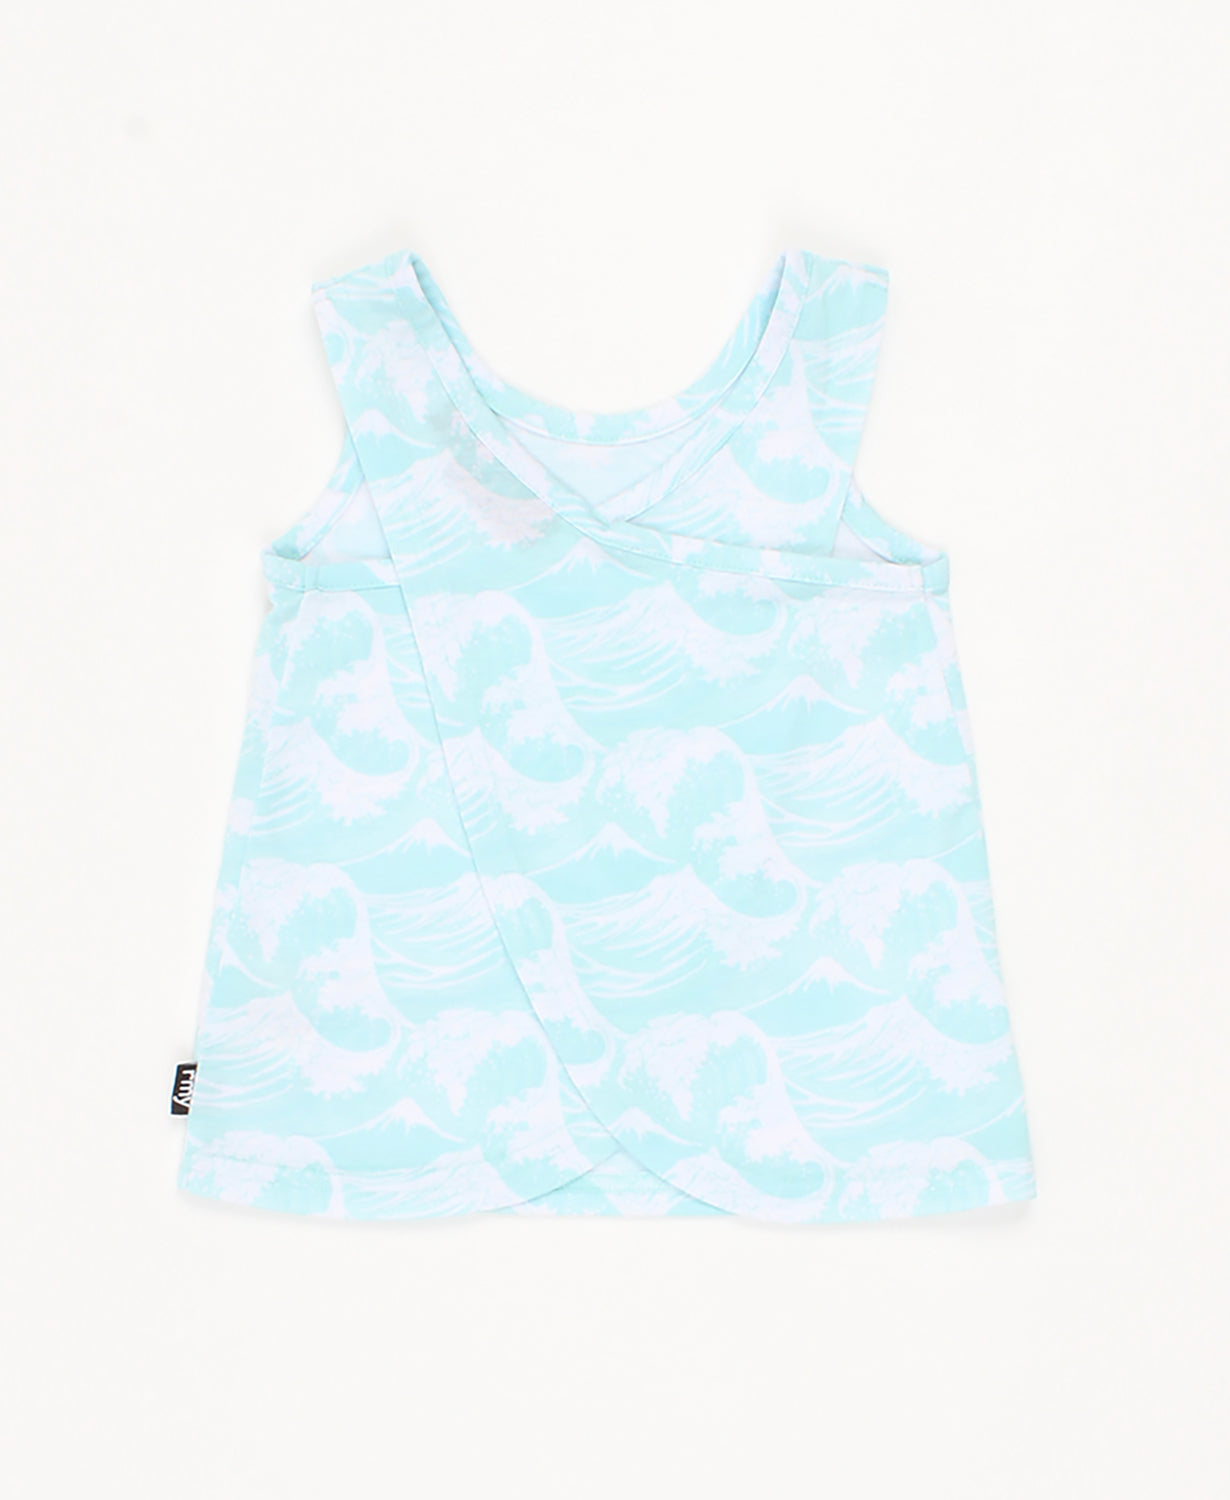 CAMISOLE ROMY & AKSEL - RVG0026 1 SOOTHING SEA